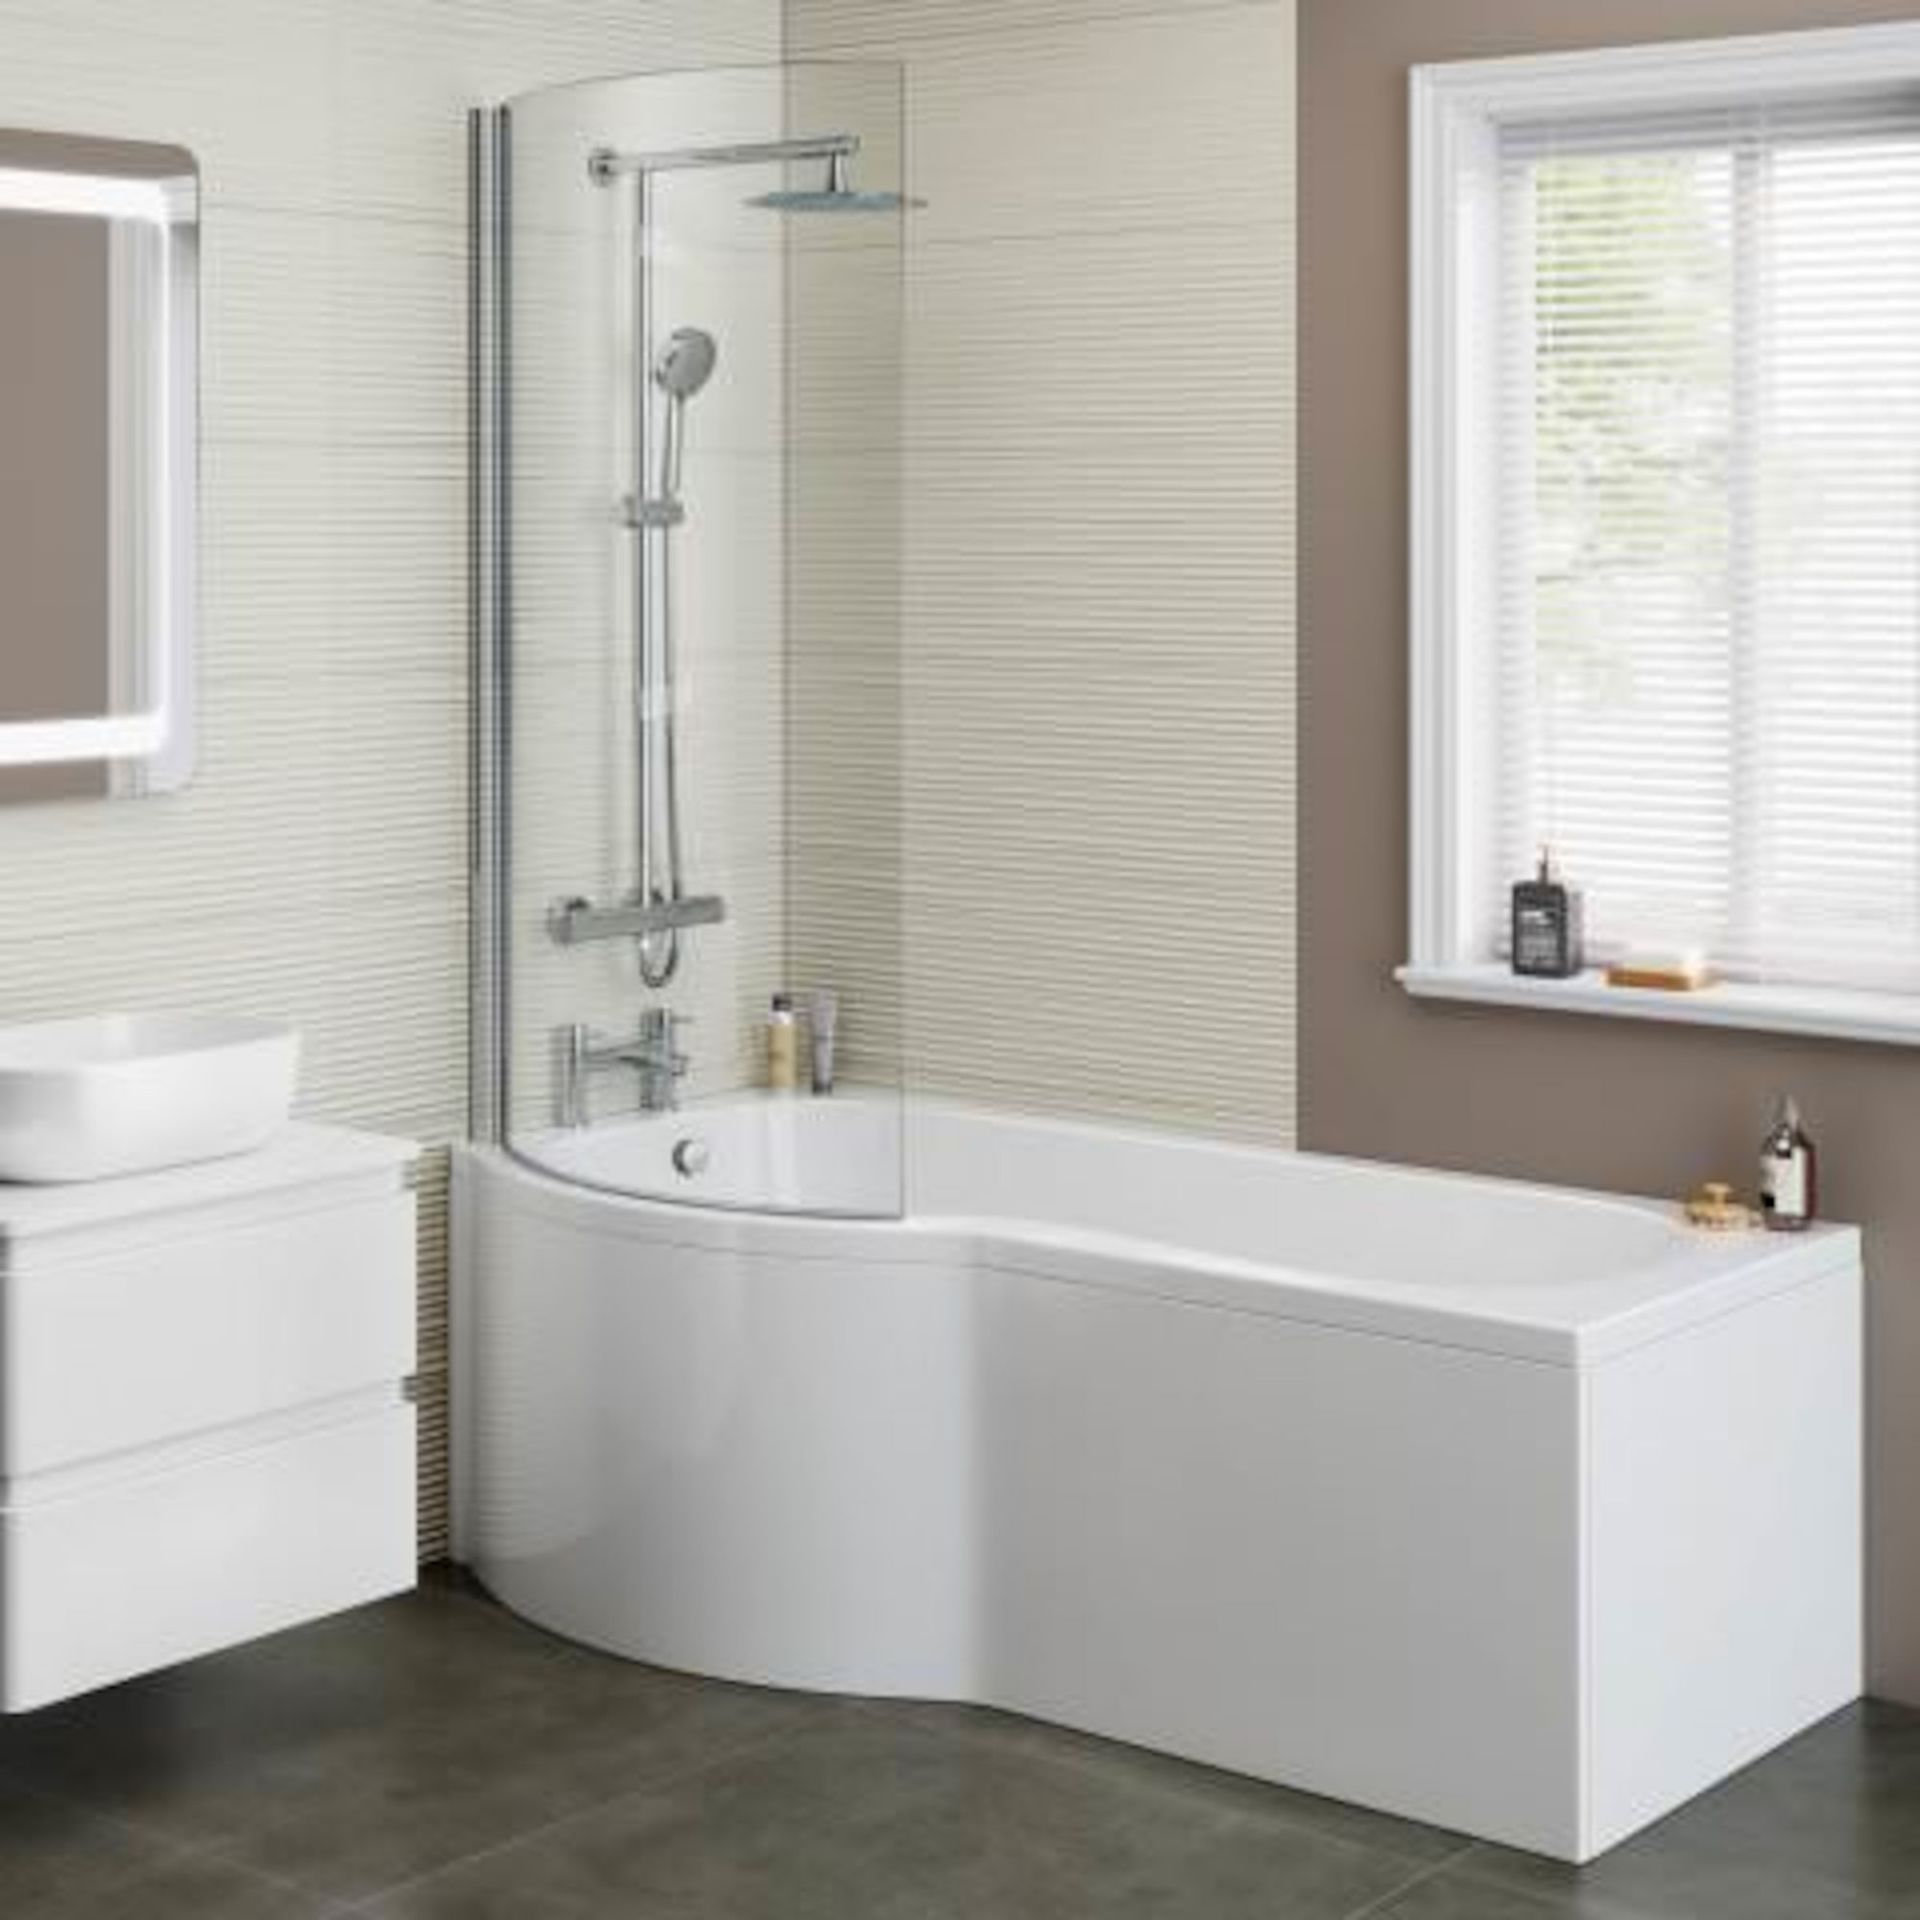 (CT44) 1700x850mm - Left Hand P-Shaped Bath with Front Panel (Excludes End Panel). RRP £339.99.